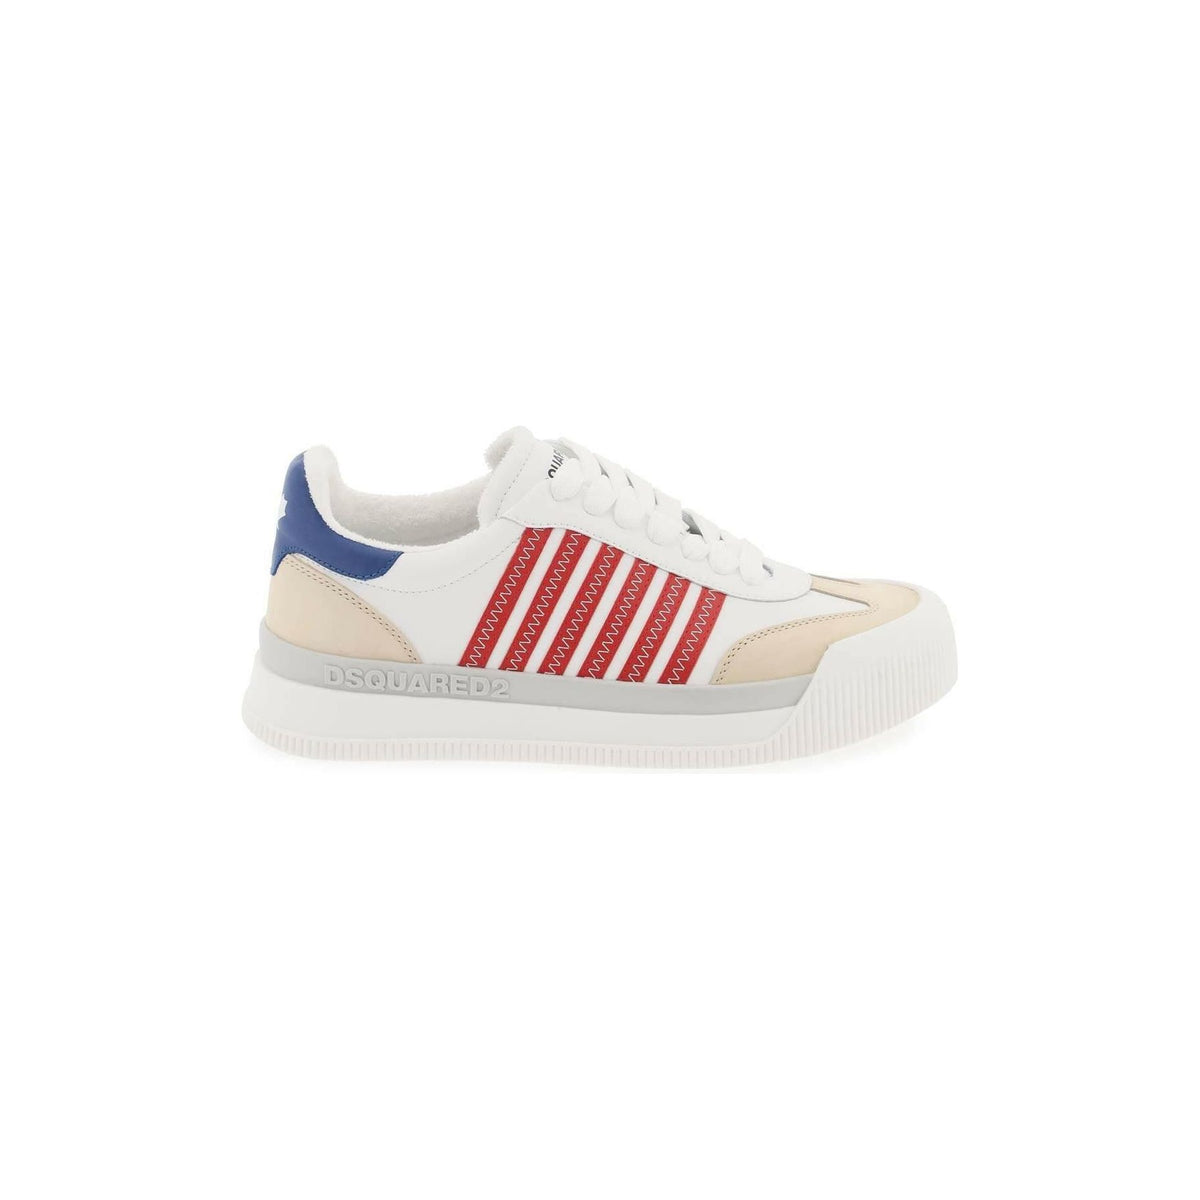 DSQUARED2 - White Red Blue New Jersey Leather Sneakers - JOHN JULIA